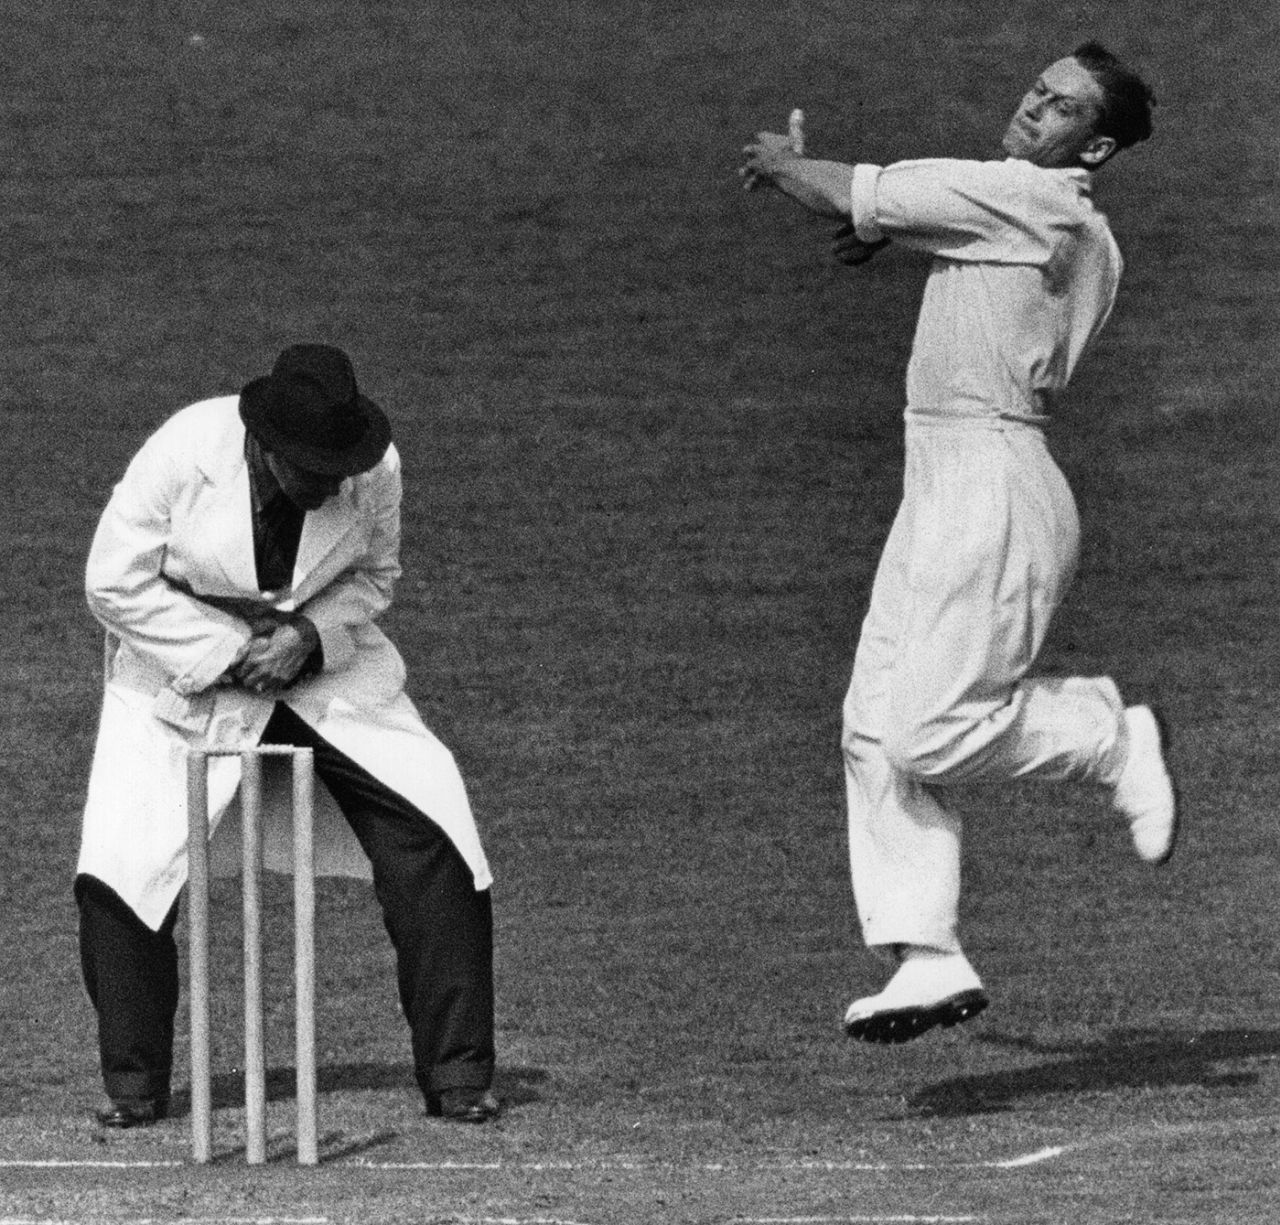 Gubby Allen in his delivery stride, 1936